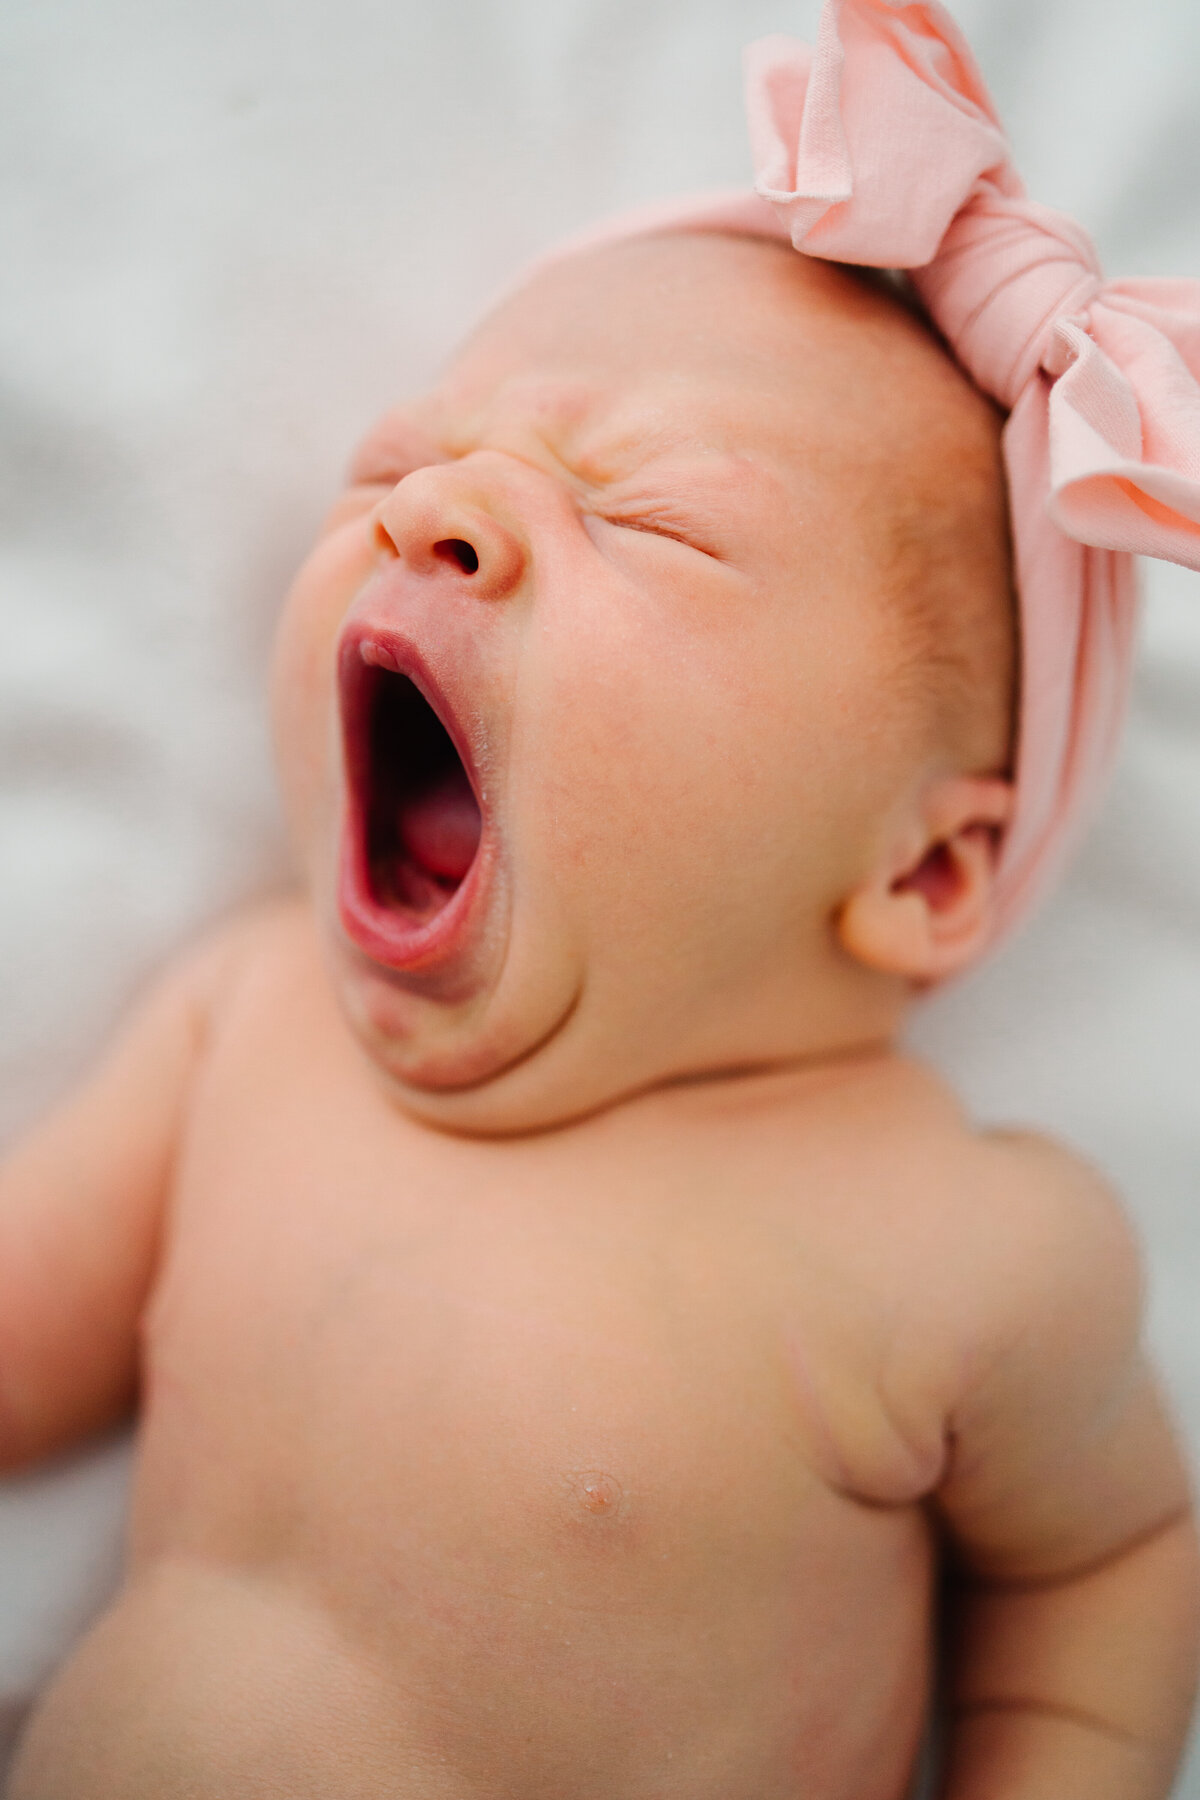 Newborn baby yawning with a baby pink headband on a white blanket